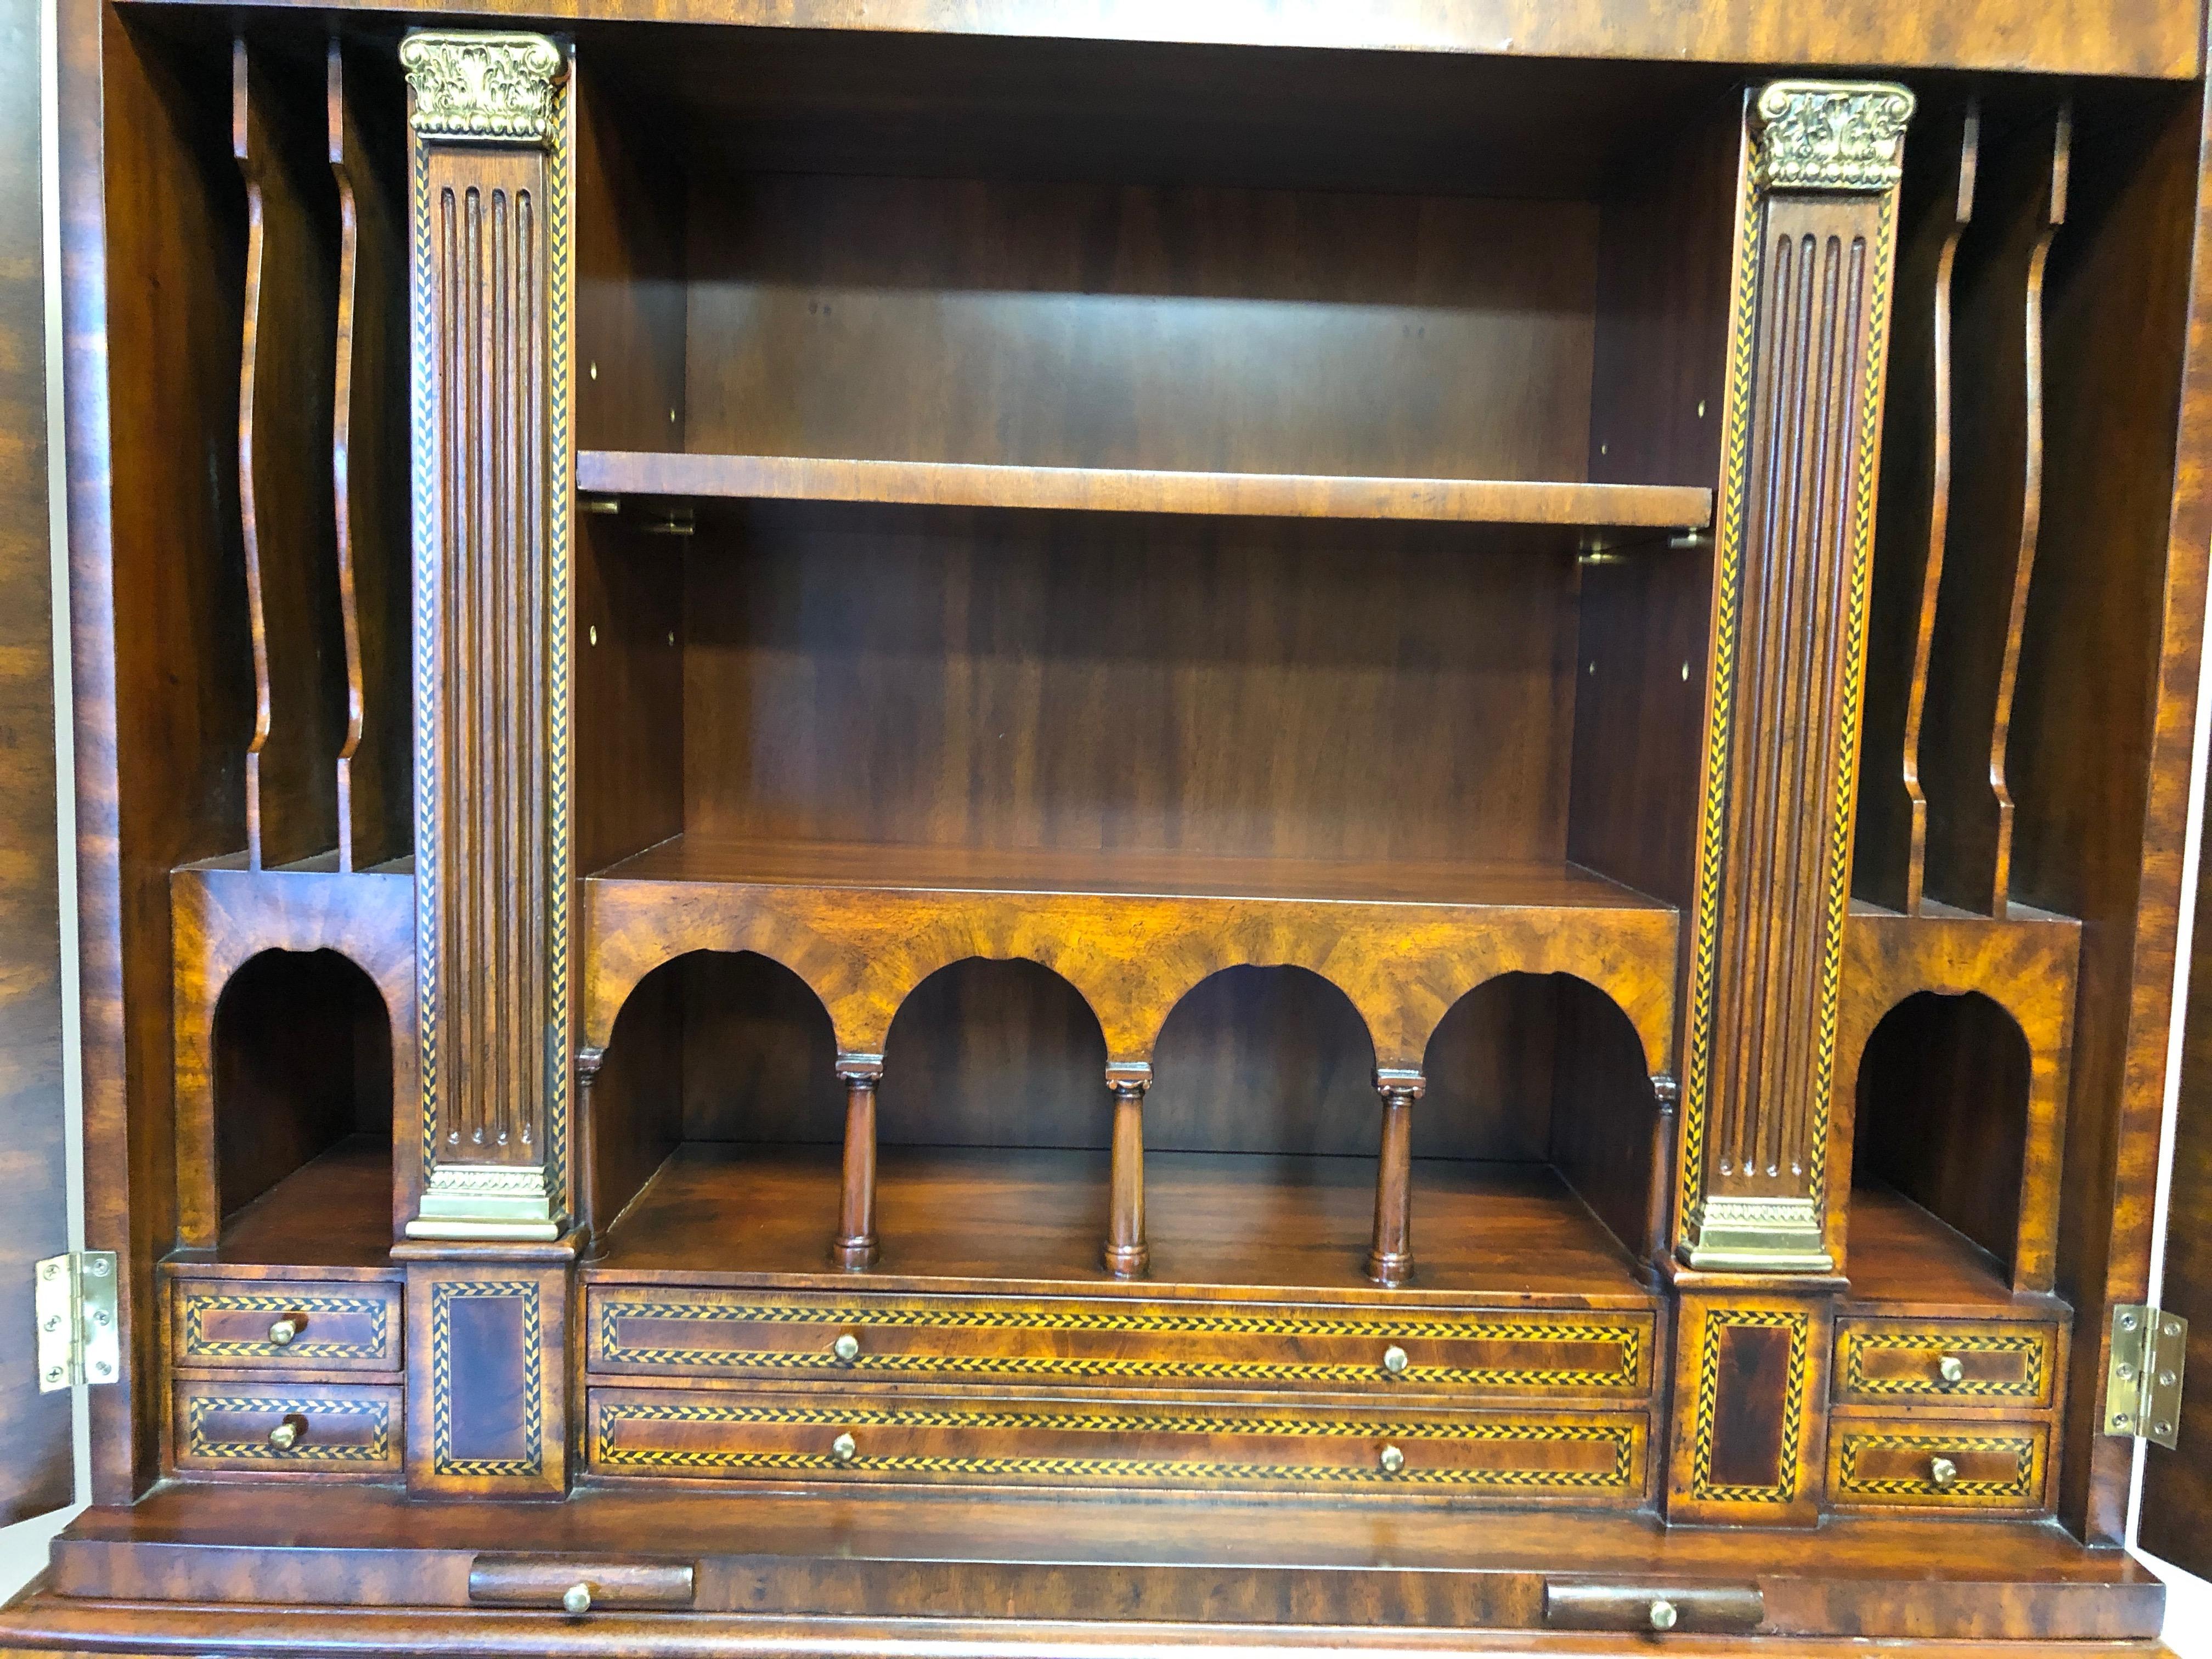 A superior impressively intricate secretary having amazing details such as satinwood and ebony inlay, leather embossed desk surface, a pair of slide out candle holders, gorgeous neoclassical decorations, tons of cubbies and a tudor or gothic style